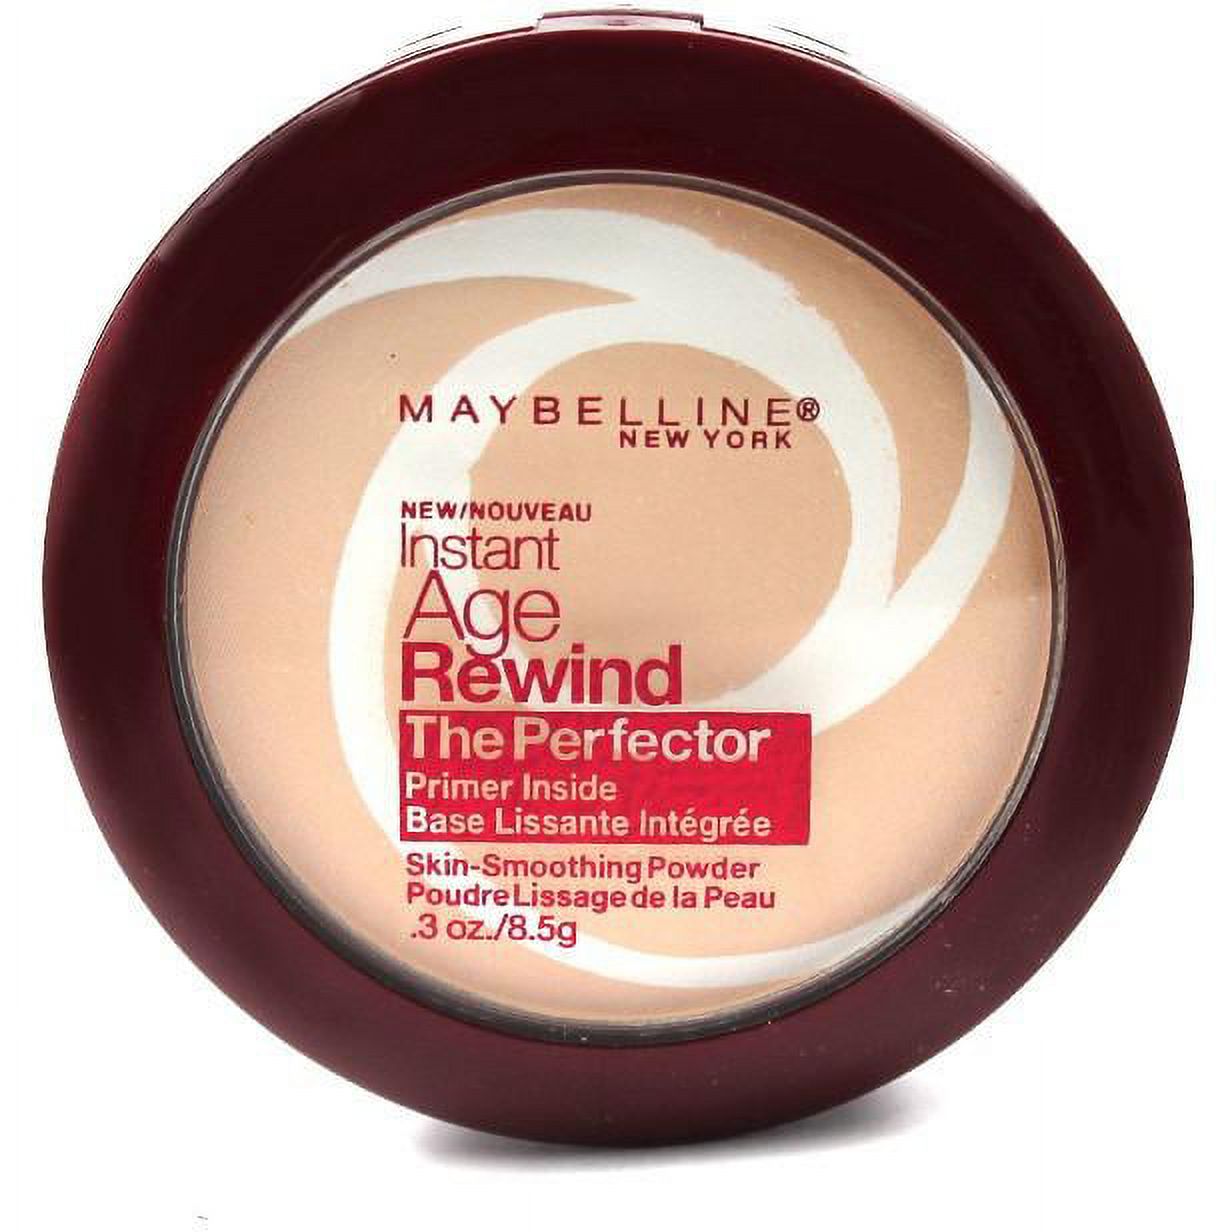 Maybelline Instant Age Rewind The Perfector Primer Powder, Light - image 2 of 7